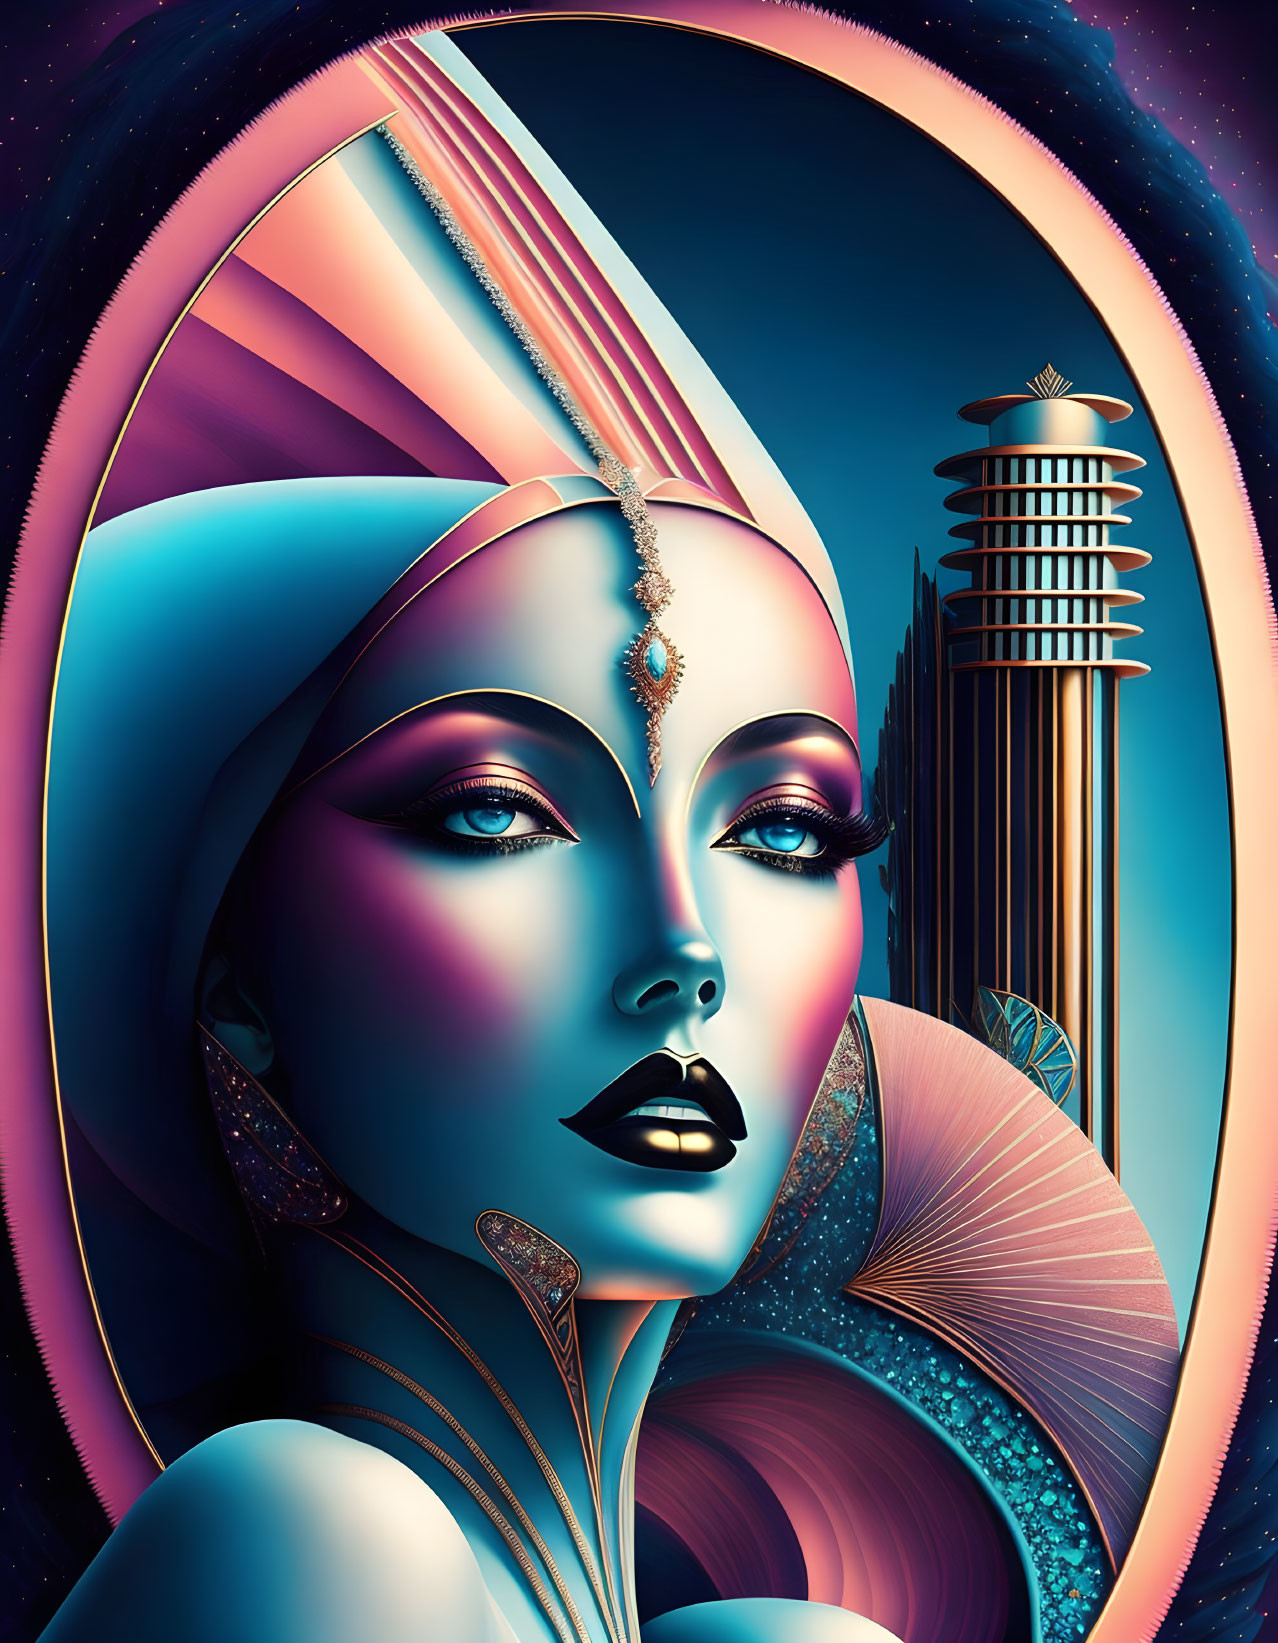 Futuristic woman portrait with abstract backdrop